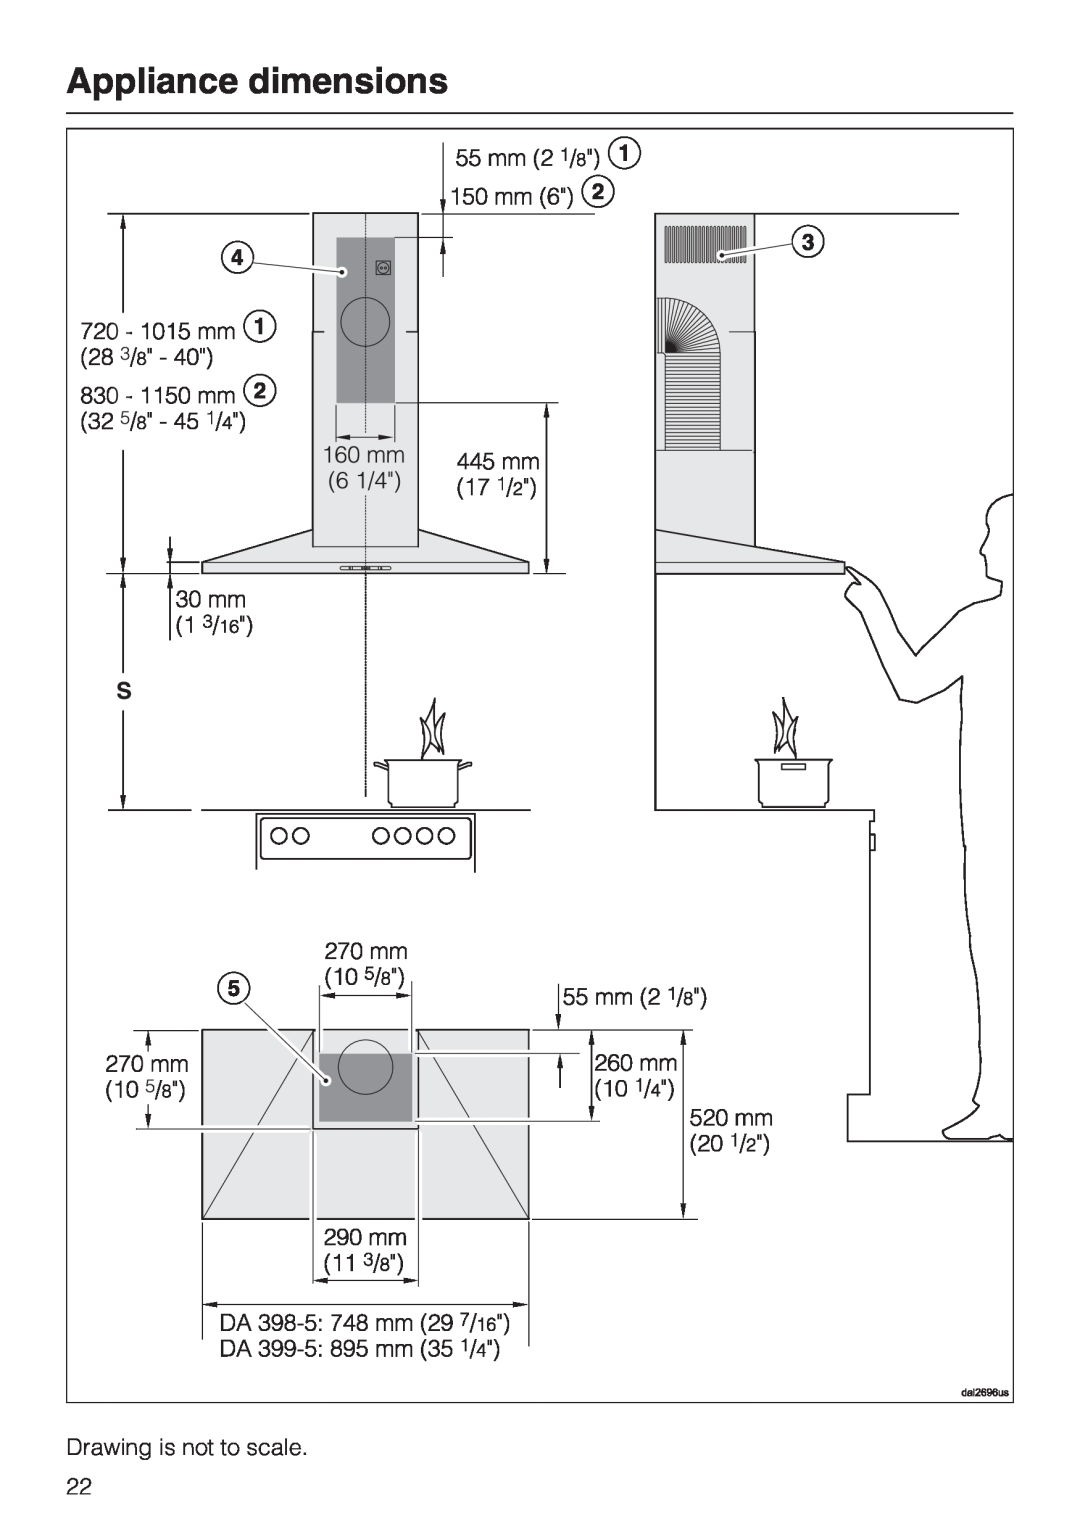 Miele DA 399-5, DA 398-5 installation instructions Appliance dimensions, Drawing is not to scale 